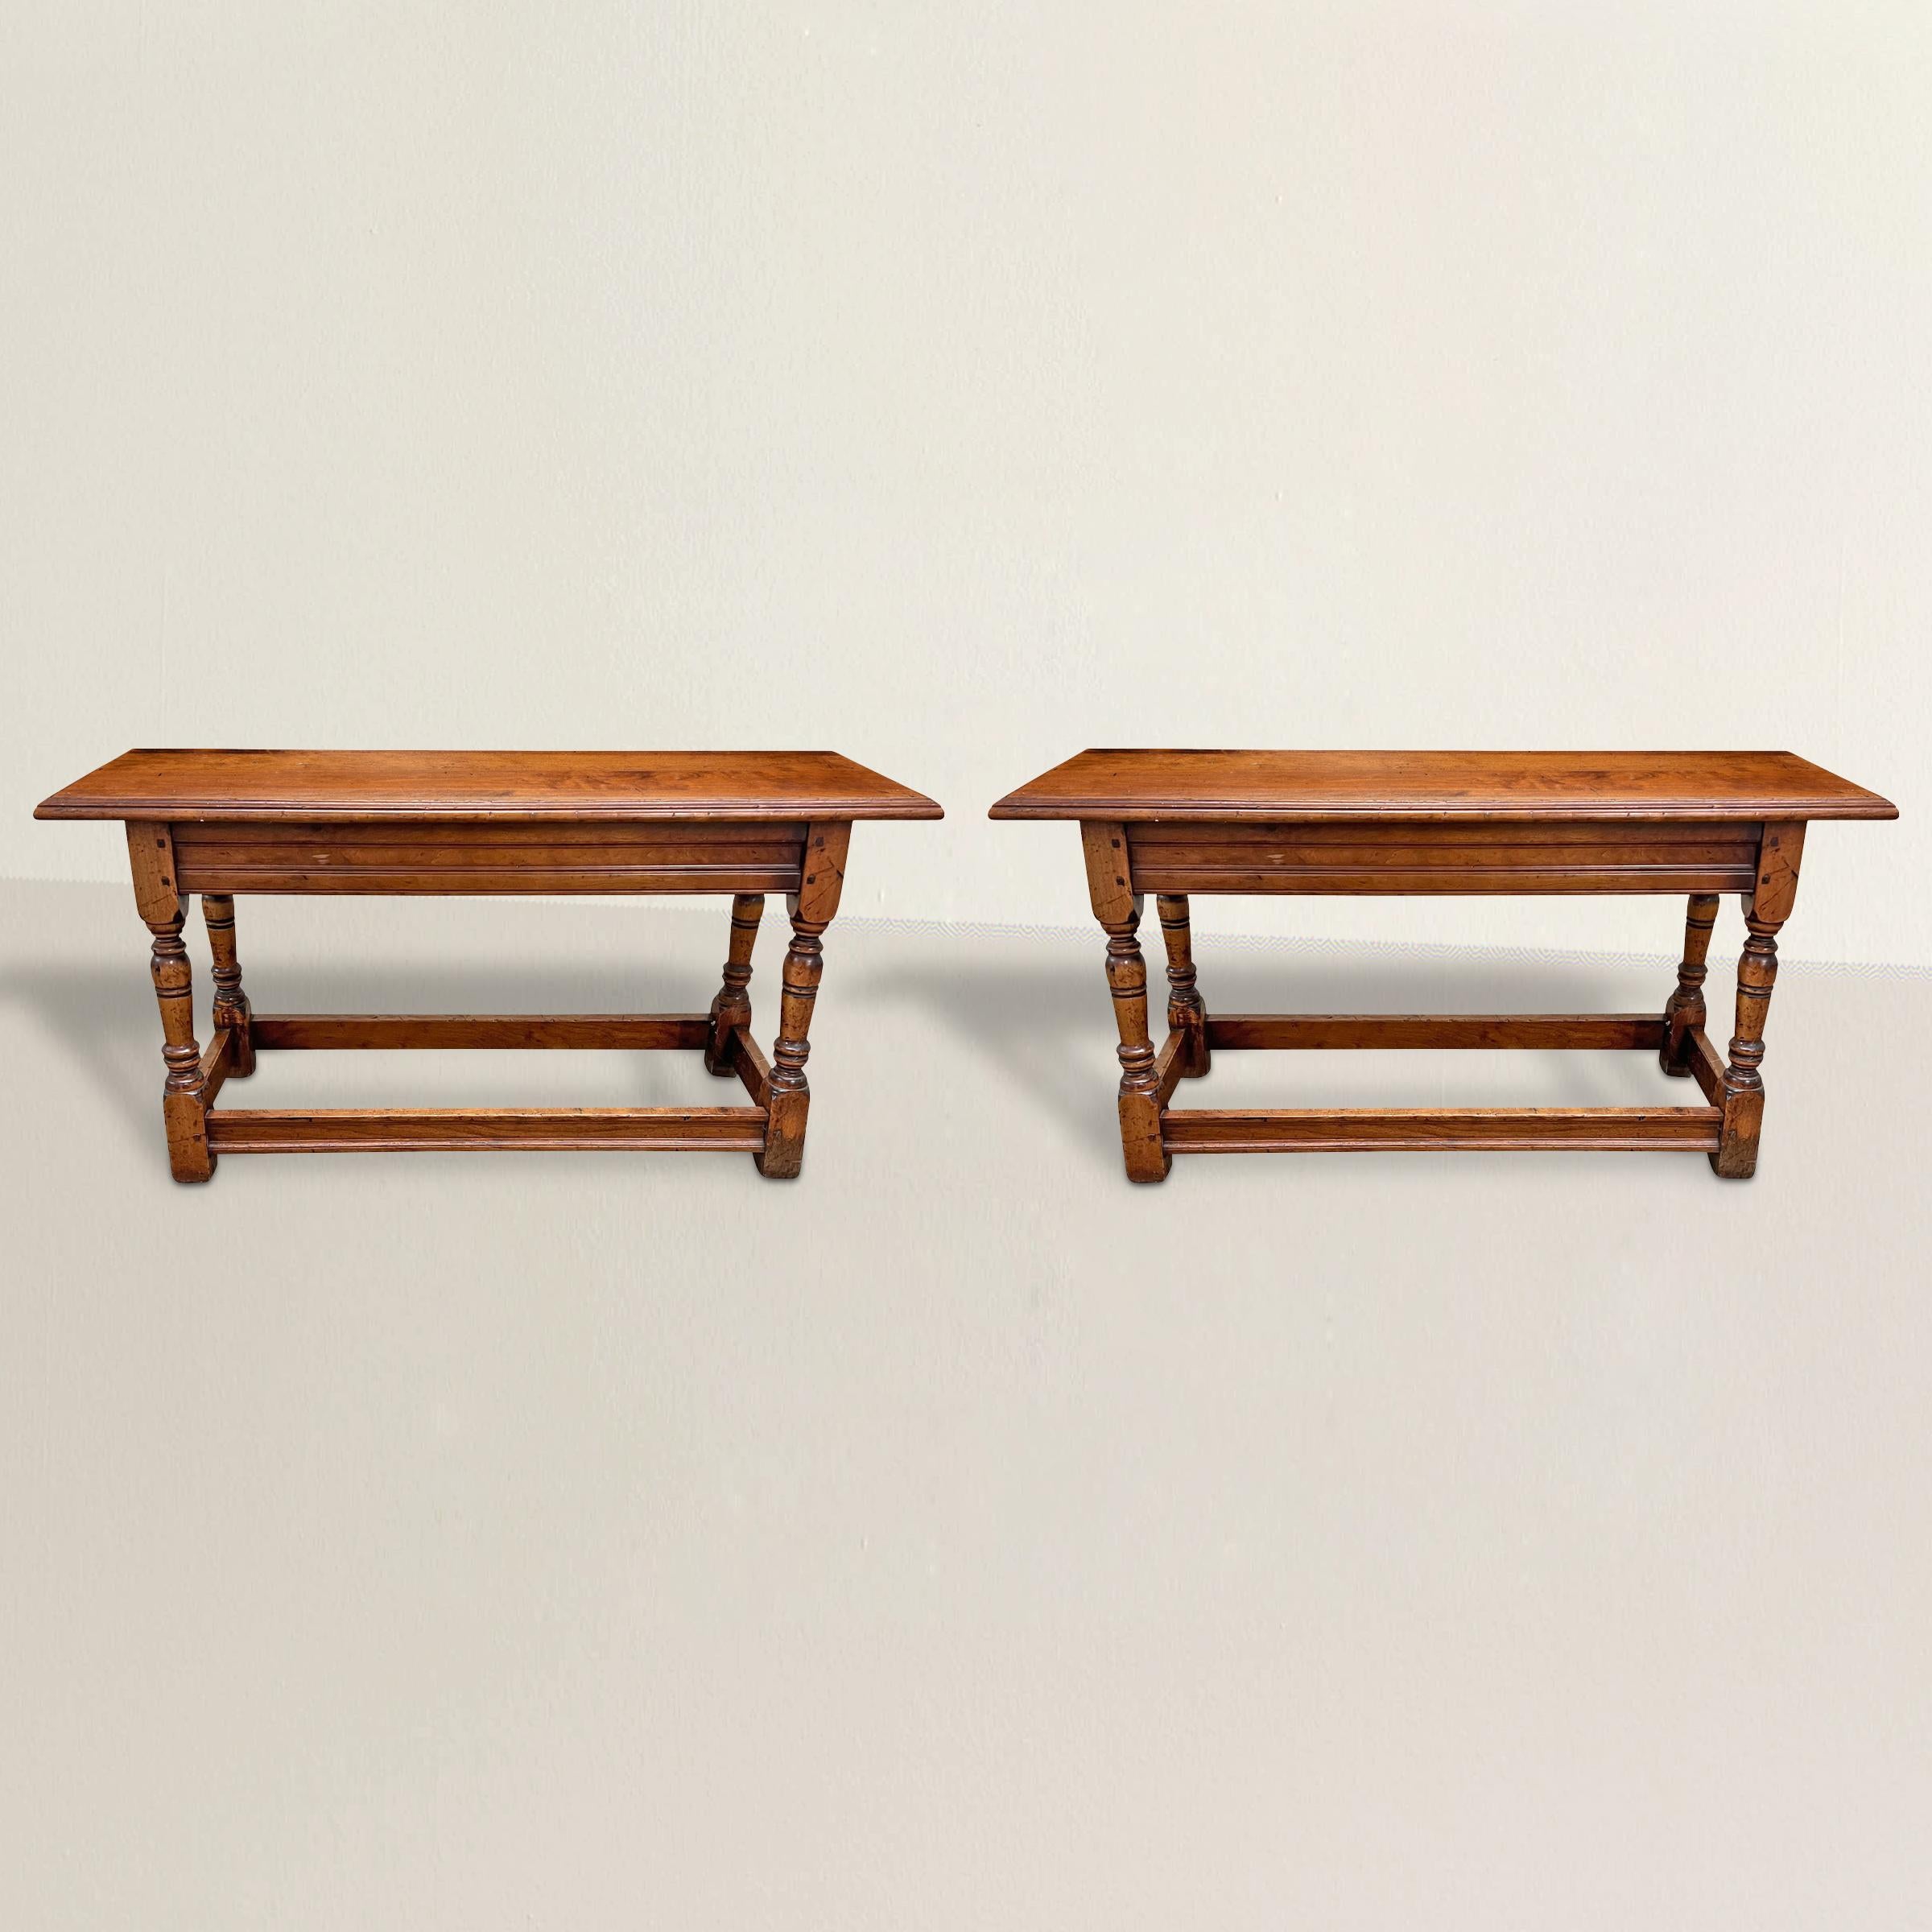 A charming pair of late 20th century English elmwood benches with turned tapered legs with simple pegged stretchers. Perfect on either side of your breakfast table, at the foot of twin beds, or running down the hall of your country house.